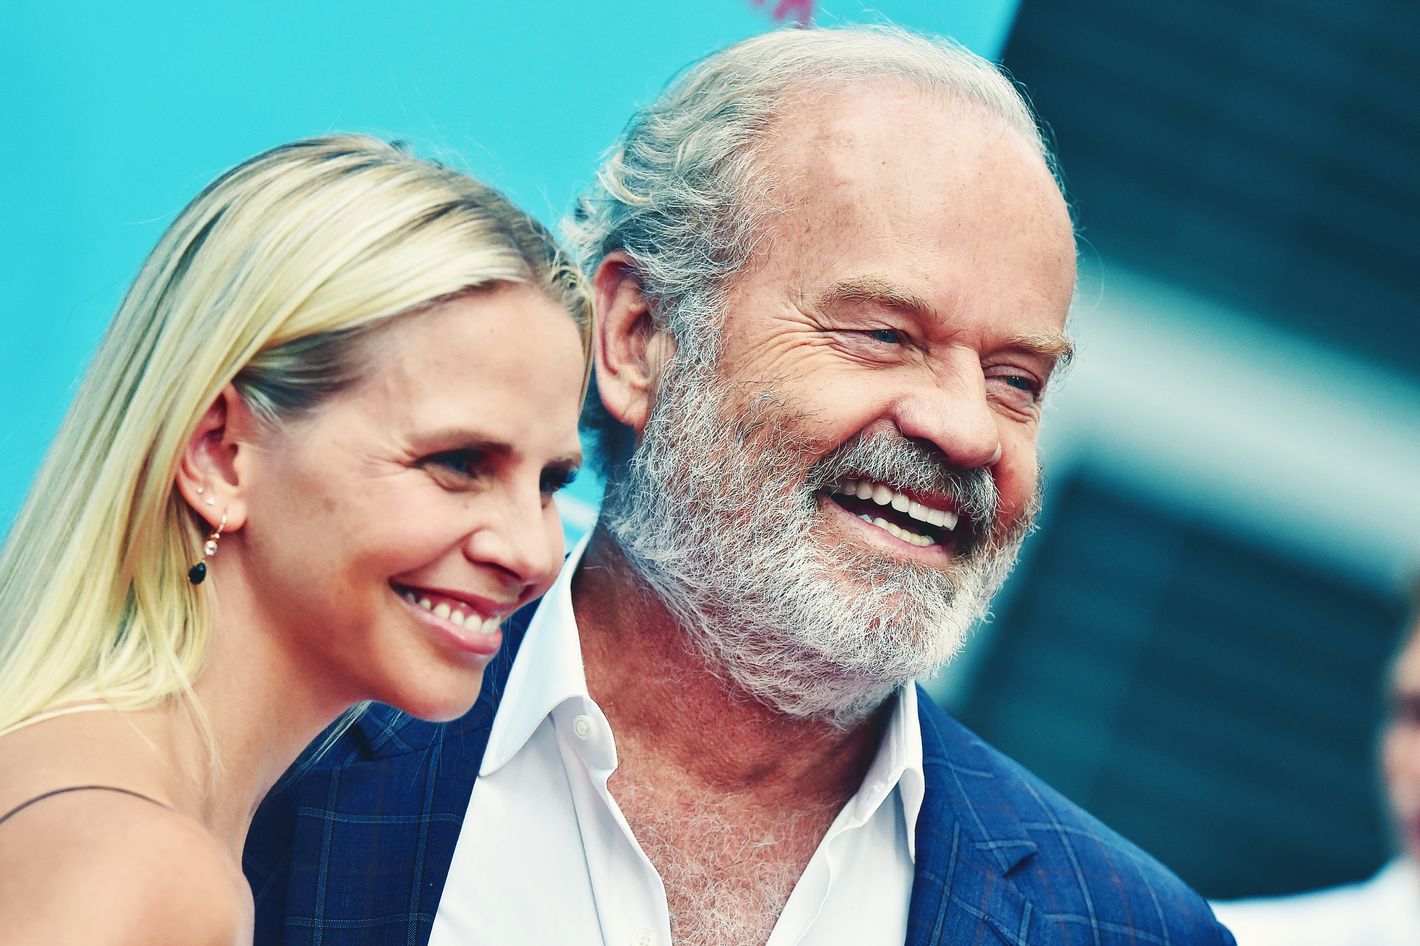 Kelsey Grammer Has an Anti-Cheating Tattoo on His Crotch